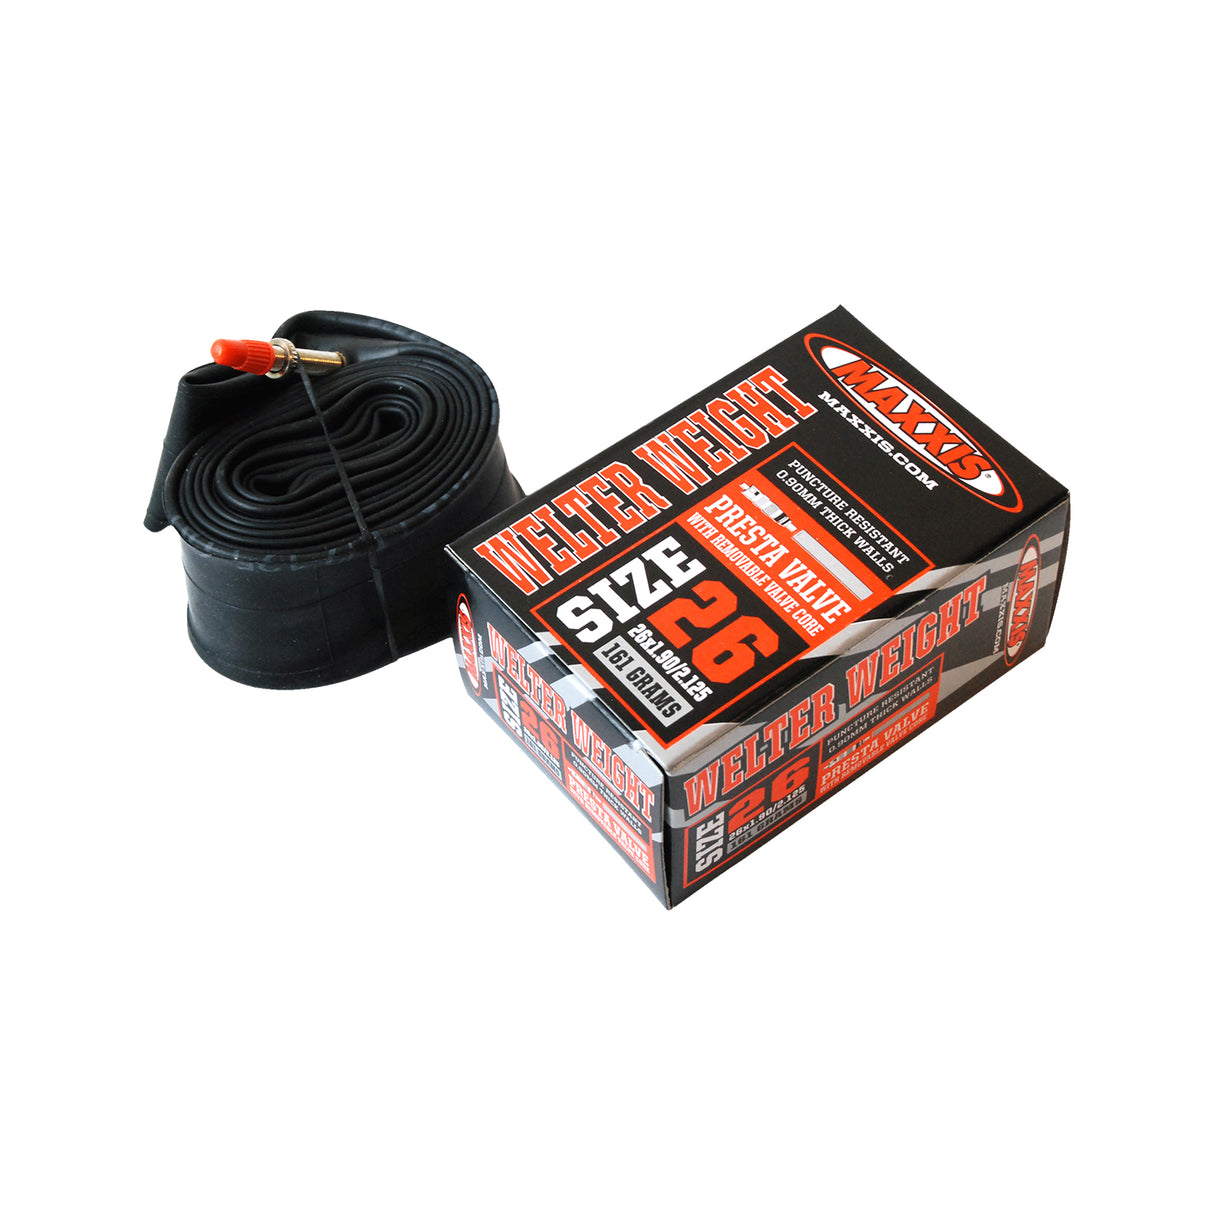 Maxxis Welter Weight Tubes